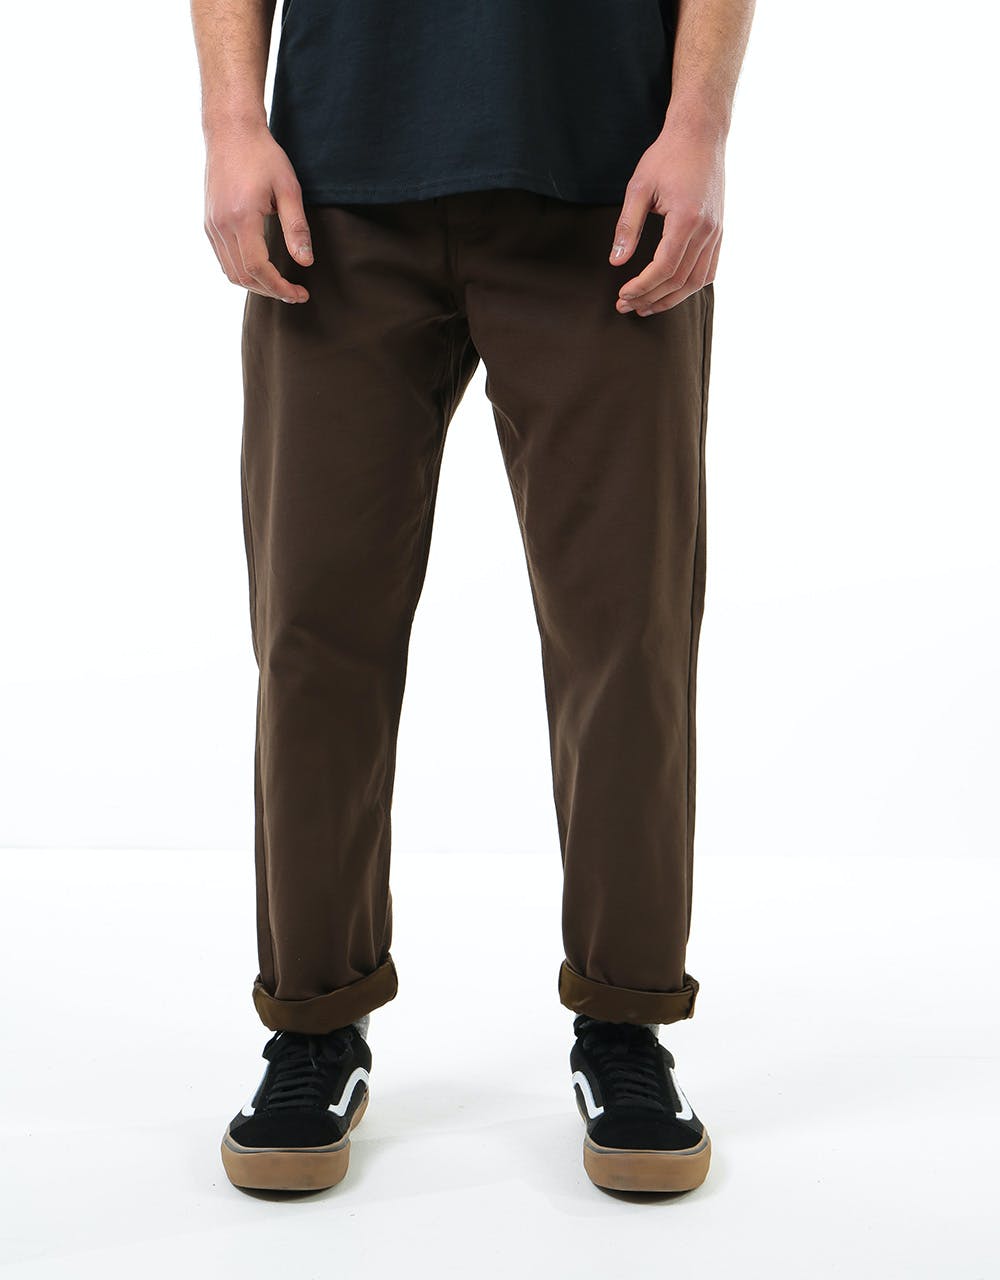 Vans Authentic Chino Glide Pro Trousers - Demitasse